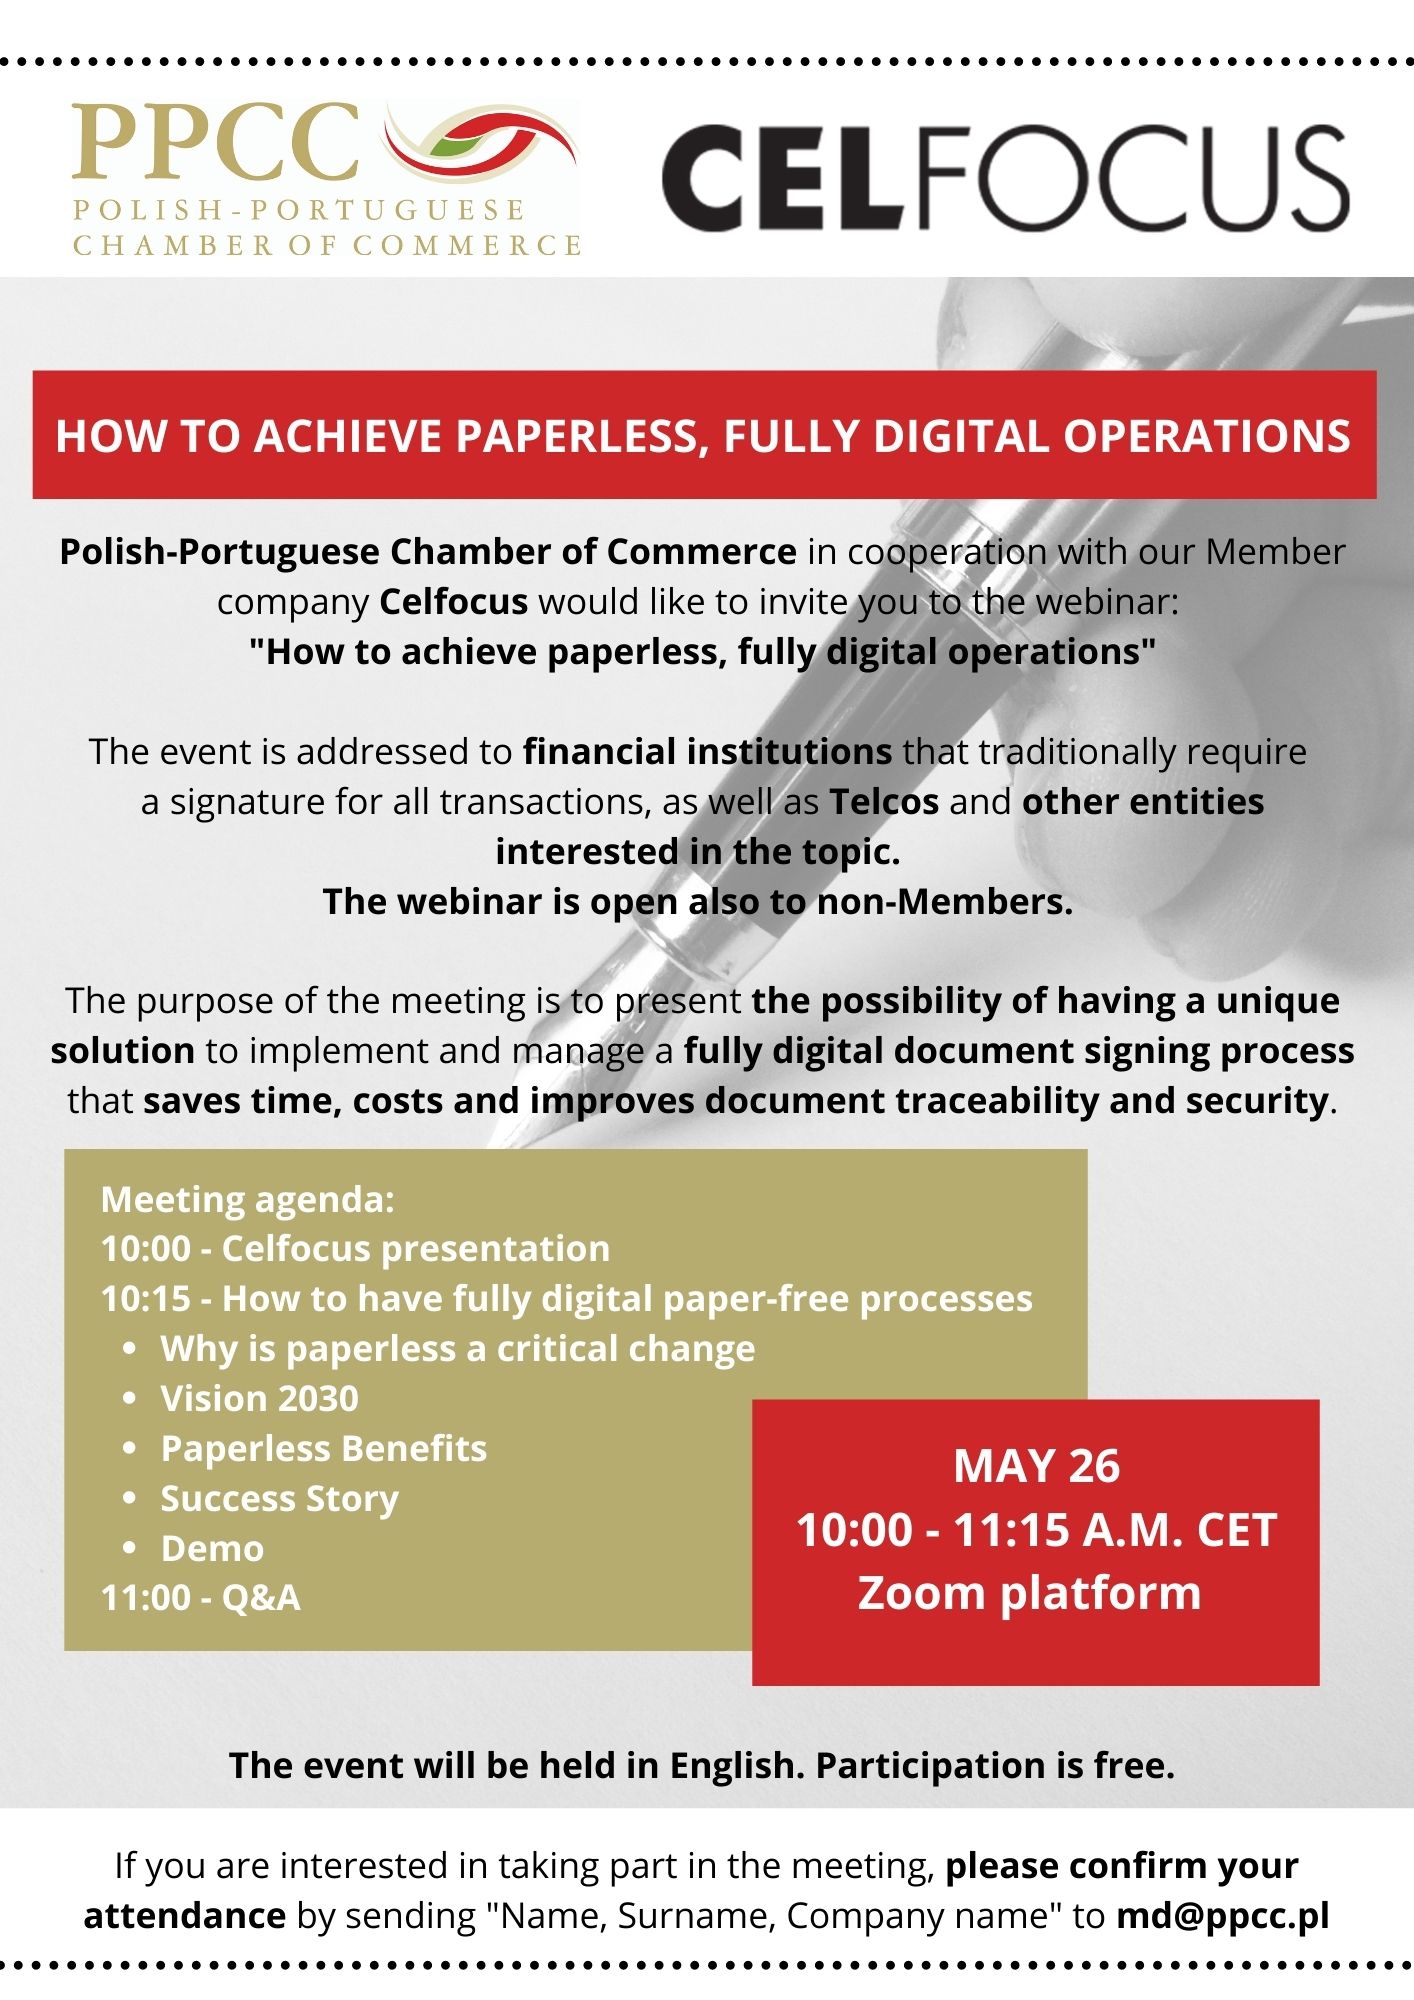 PPCC & Celfocus webinar: „How to achieve paperless, fully digital operations”, 26 May 2021, 10 a.m.